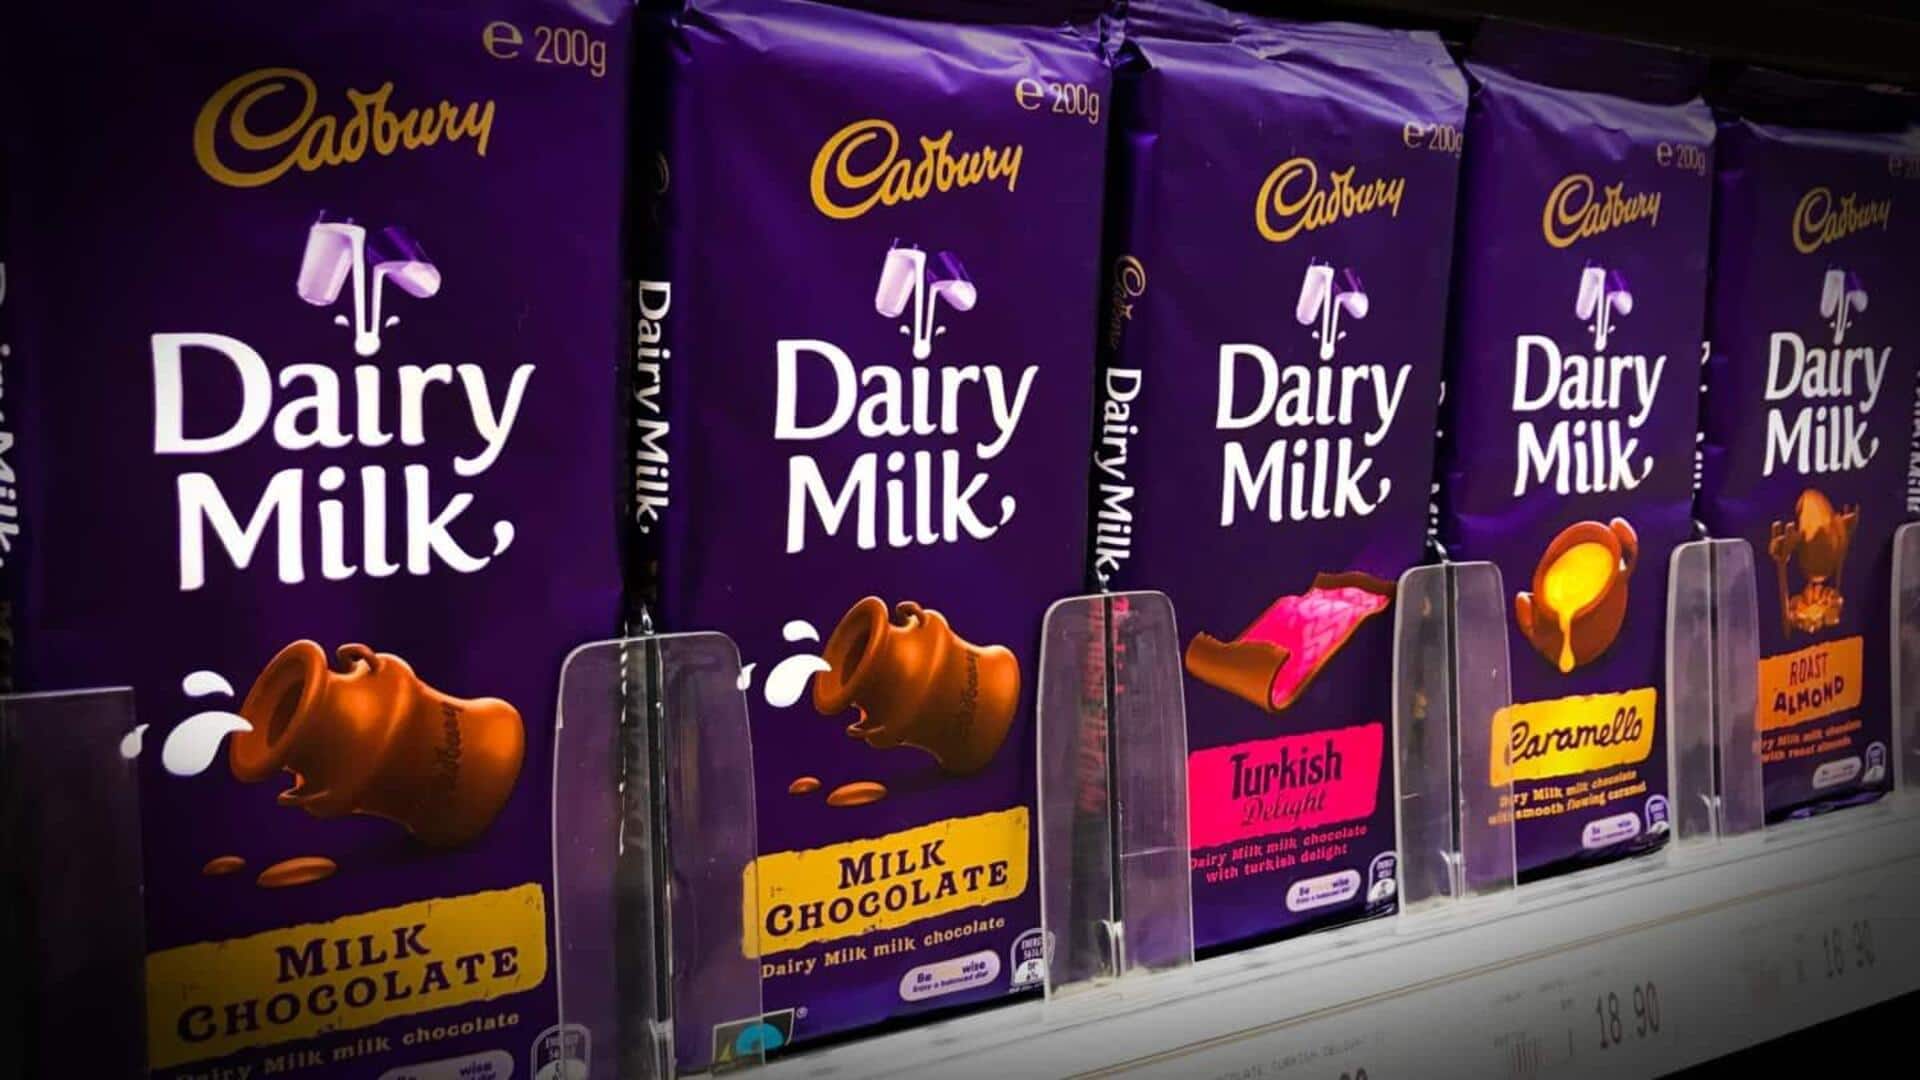 Hyderabad man finds worm crawling in Cadbury chocolate, shares video